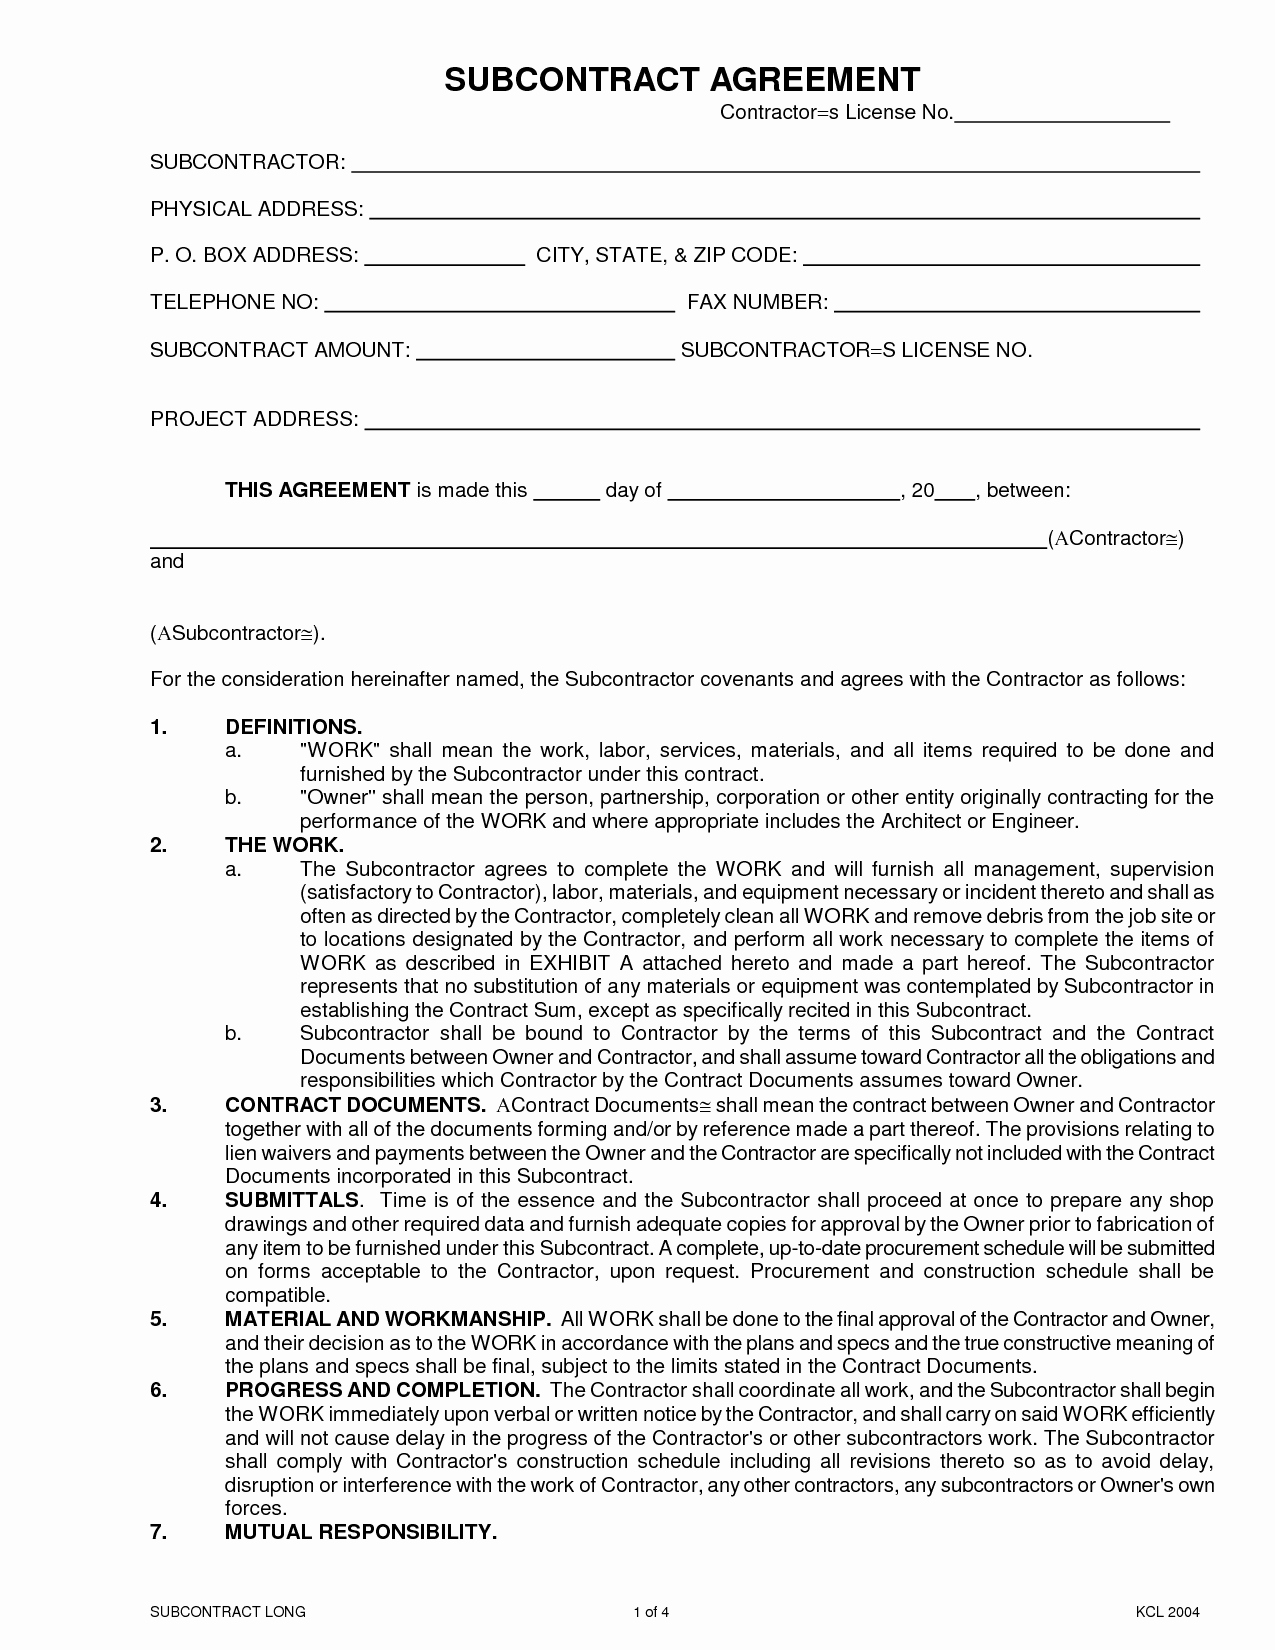 Agreement Subcontractor Agreement Template